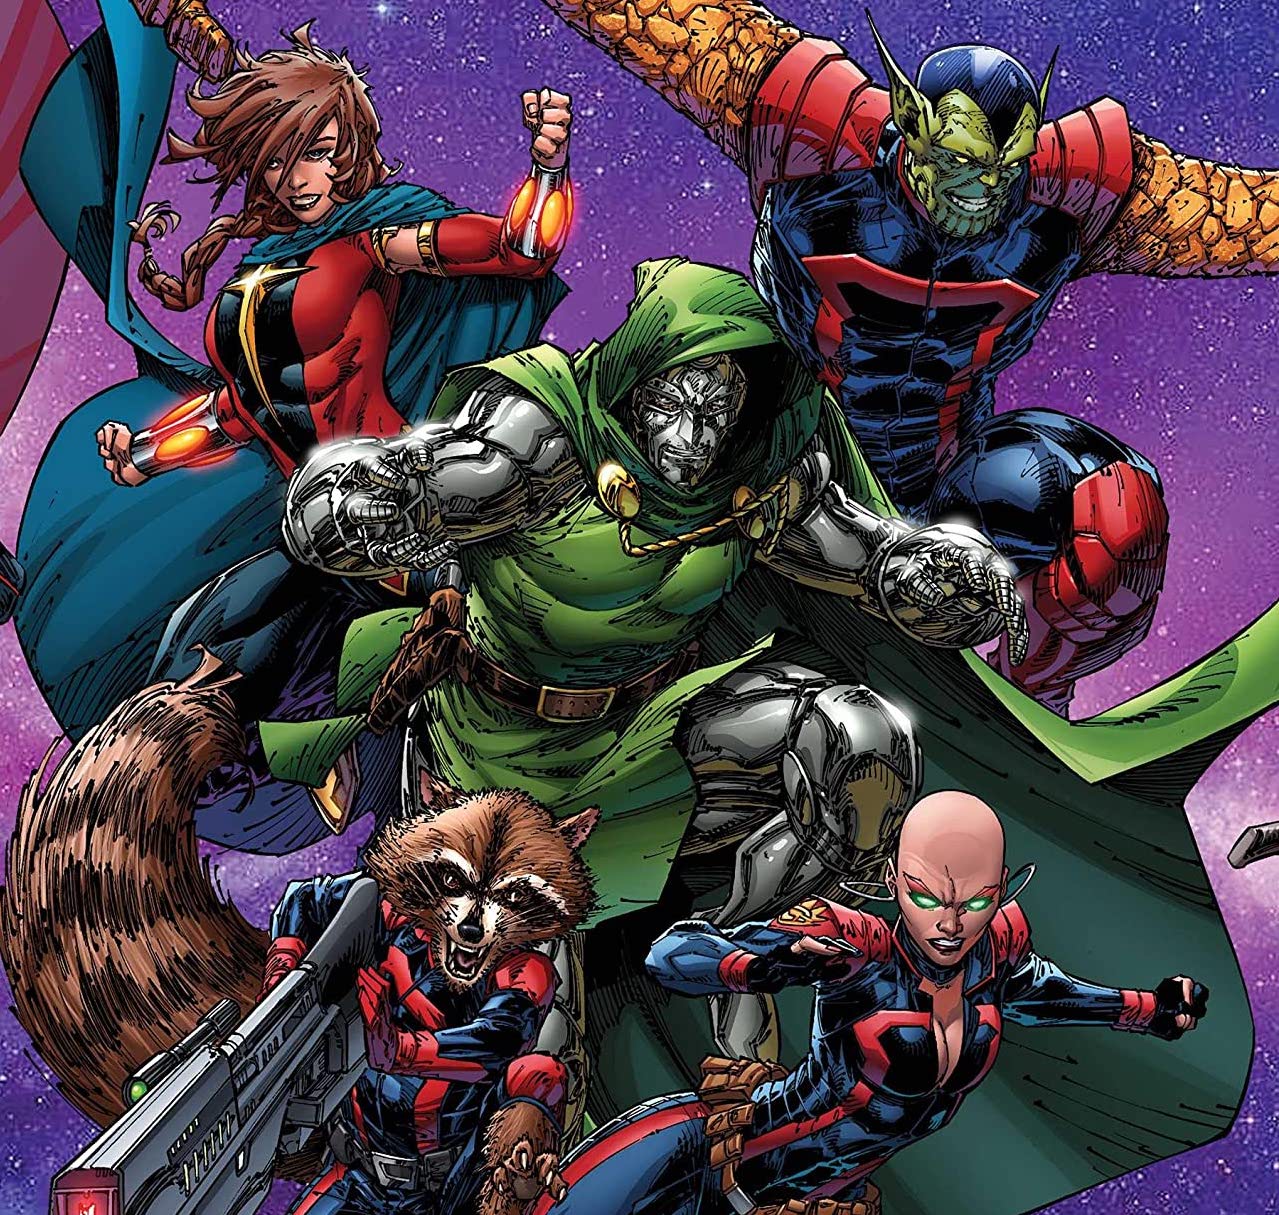 Dr. Doom shares a lot more than ideas in 'Guardians of the Galaxy' #14